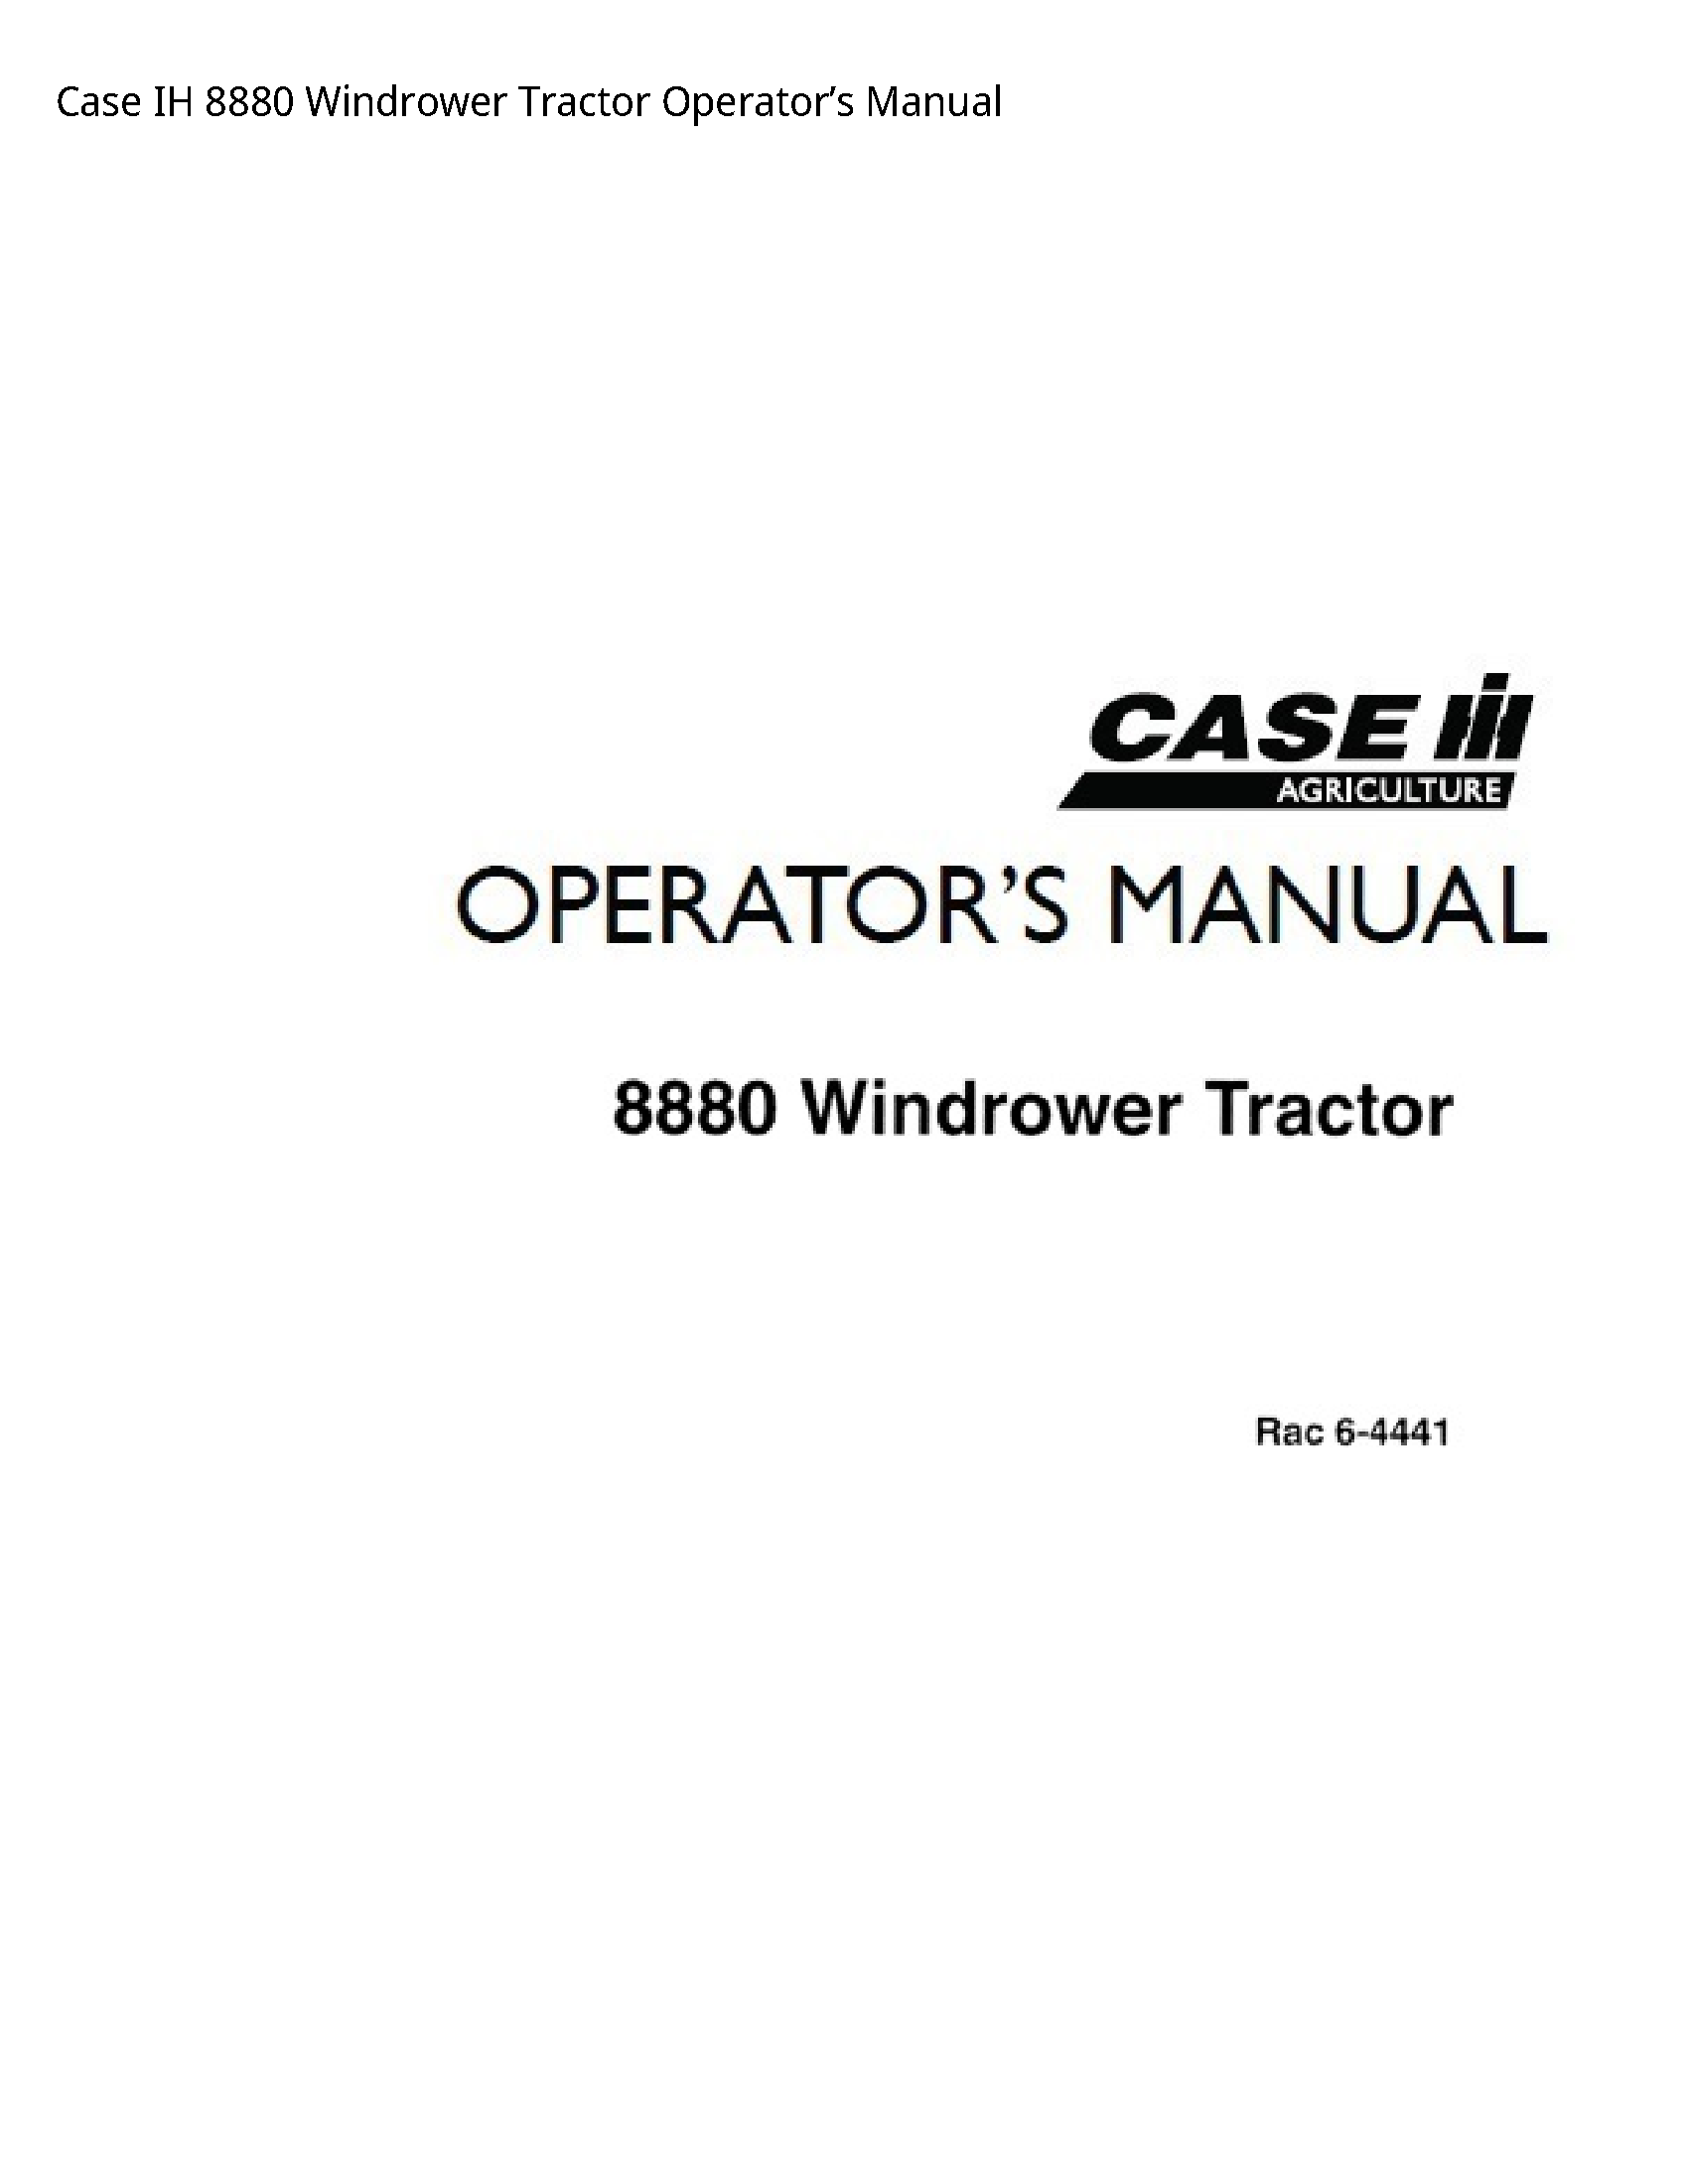 Case/Case IH 8880 IH Windrower Tractor Operator’s manual